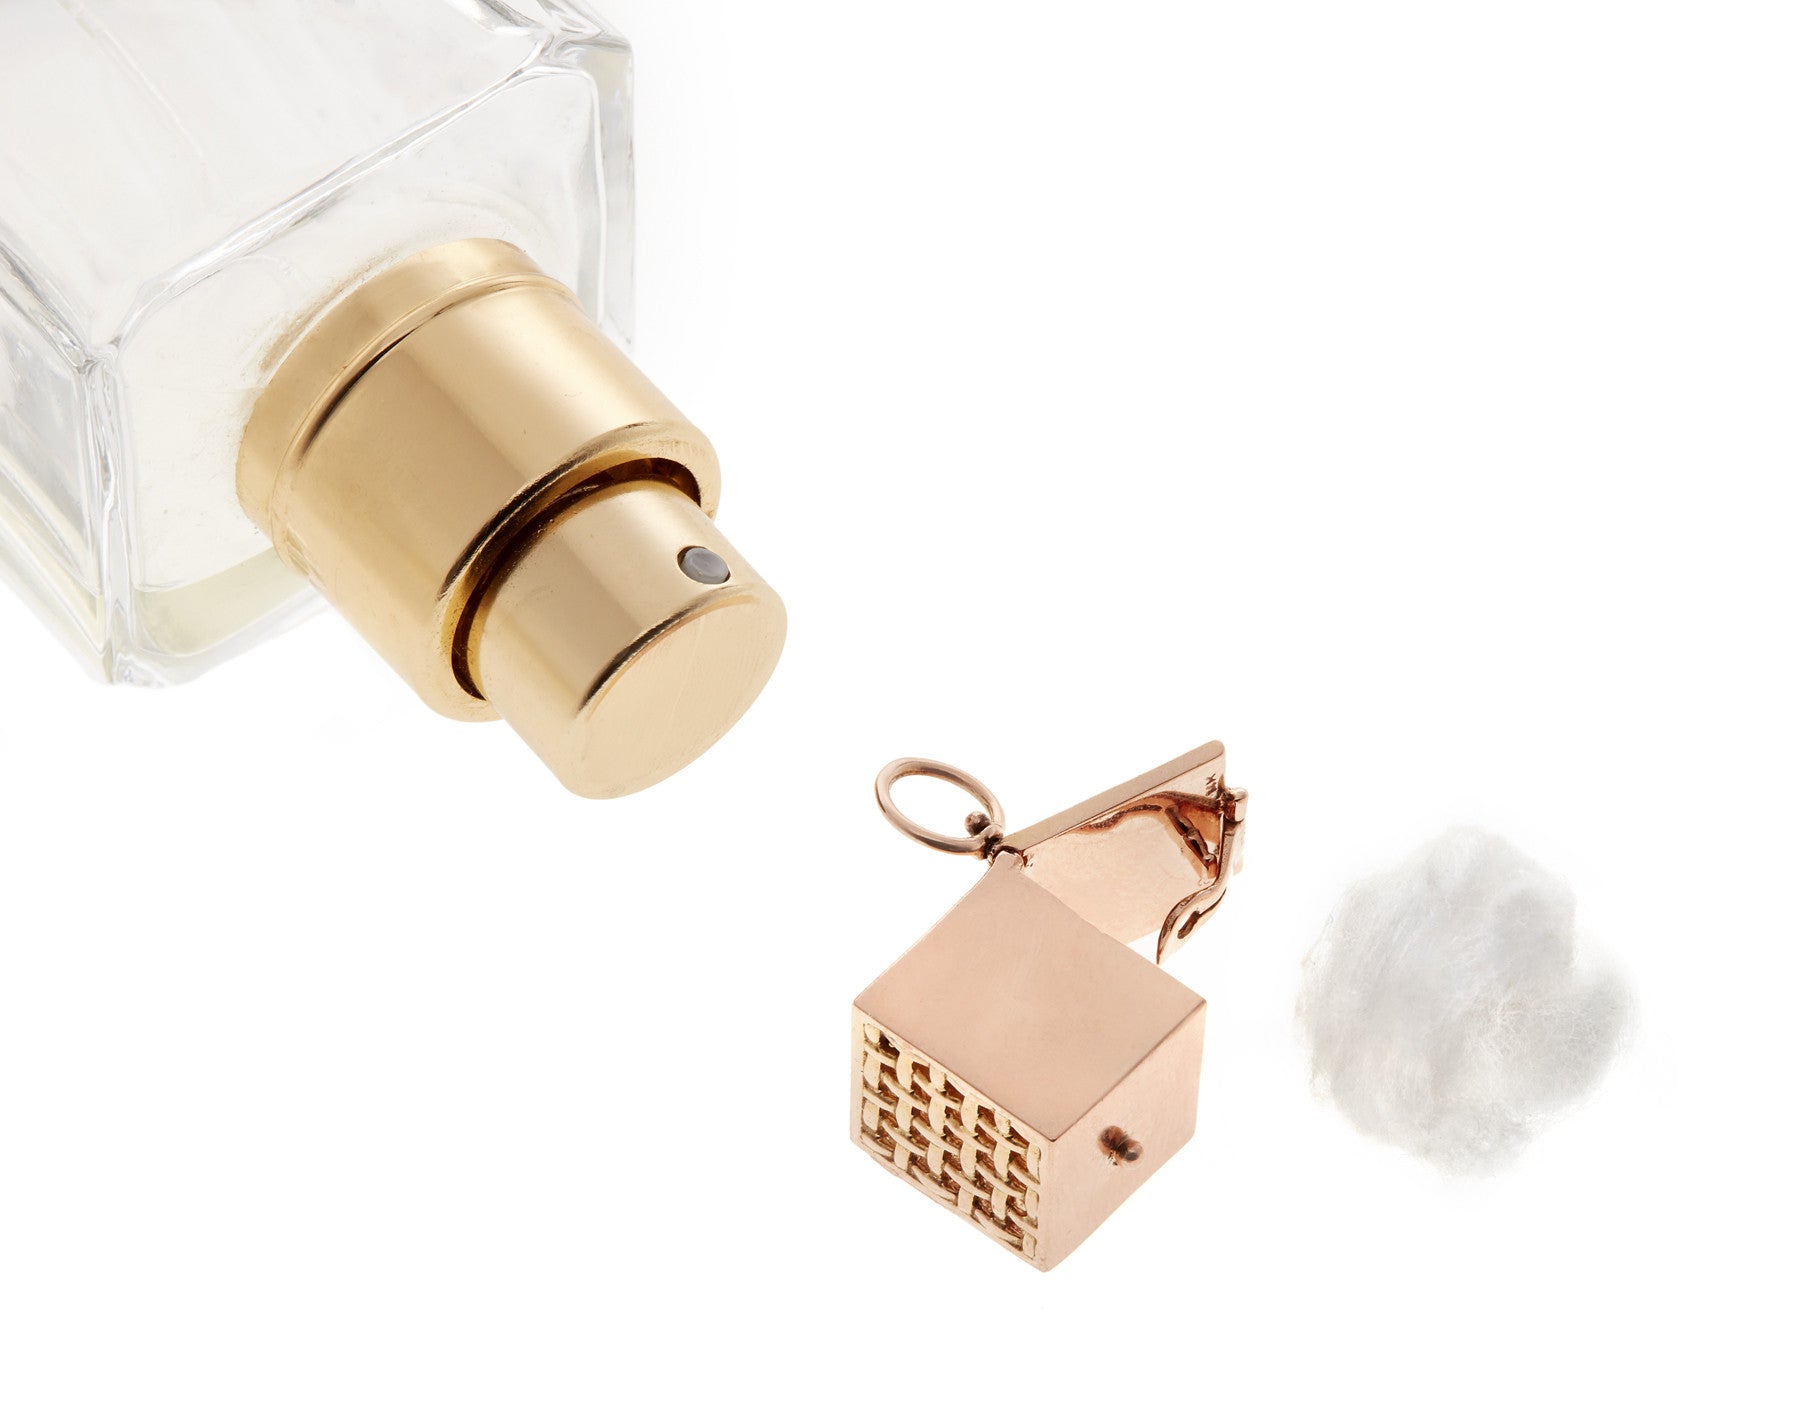 Rose gold vinaigrette vessel with top open alongside cotton ball and top section of fragrance bottle against white backdrop